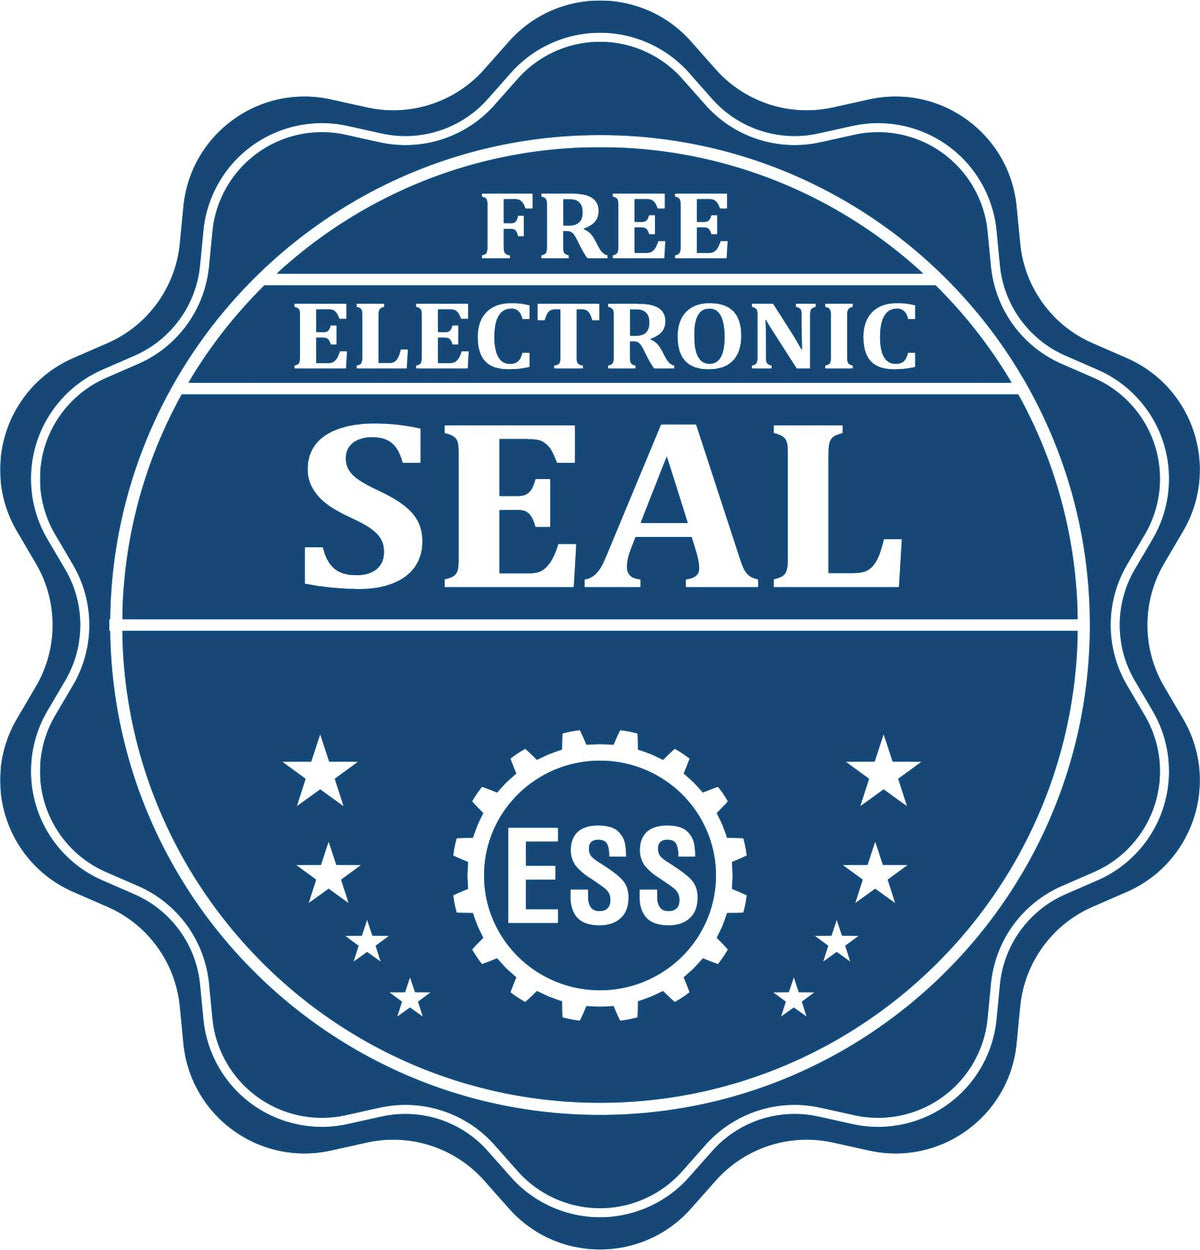 A badge showing a free electronic seal for the Slim Pre-Inked Maryland Professional Engineer Seal Stamp with stars and the ESS gear on the emblem.